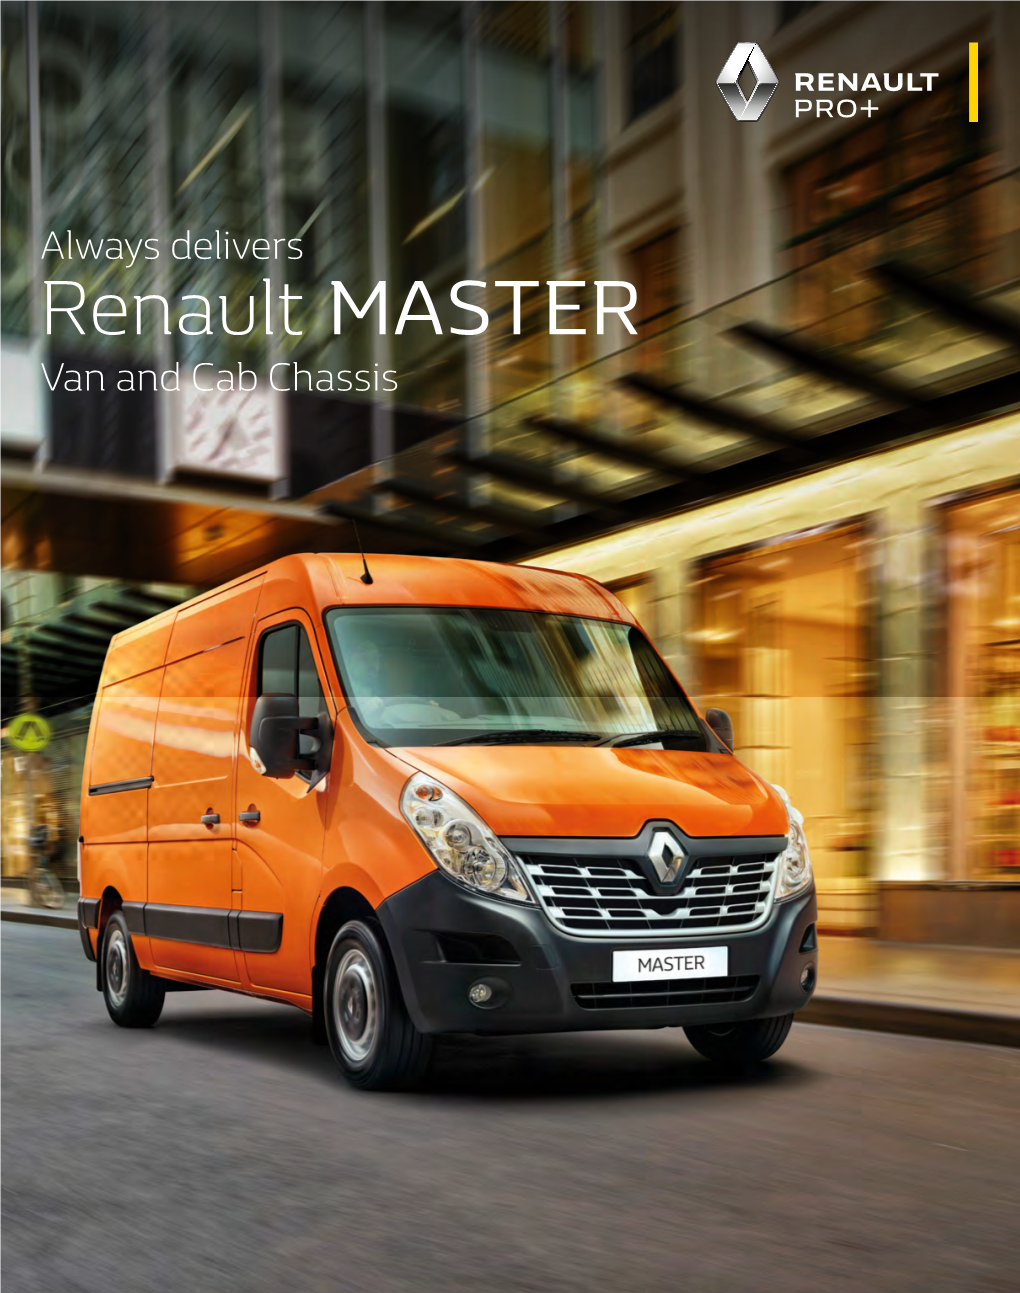 Renault MASTER Van and Cab Chassis ‘Master Stacks up Well on Just About Every Front.’